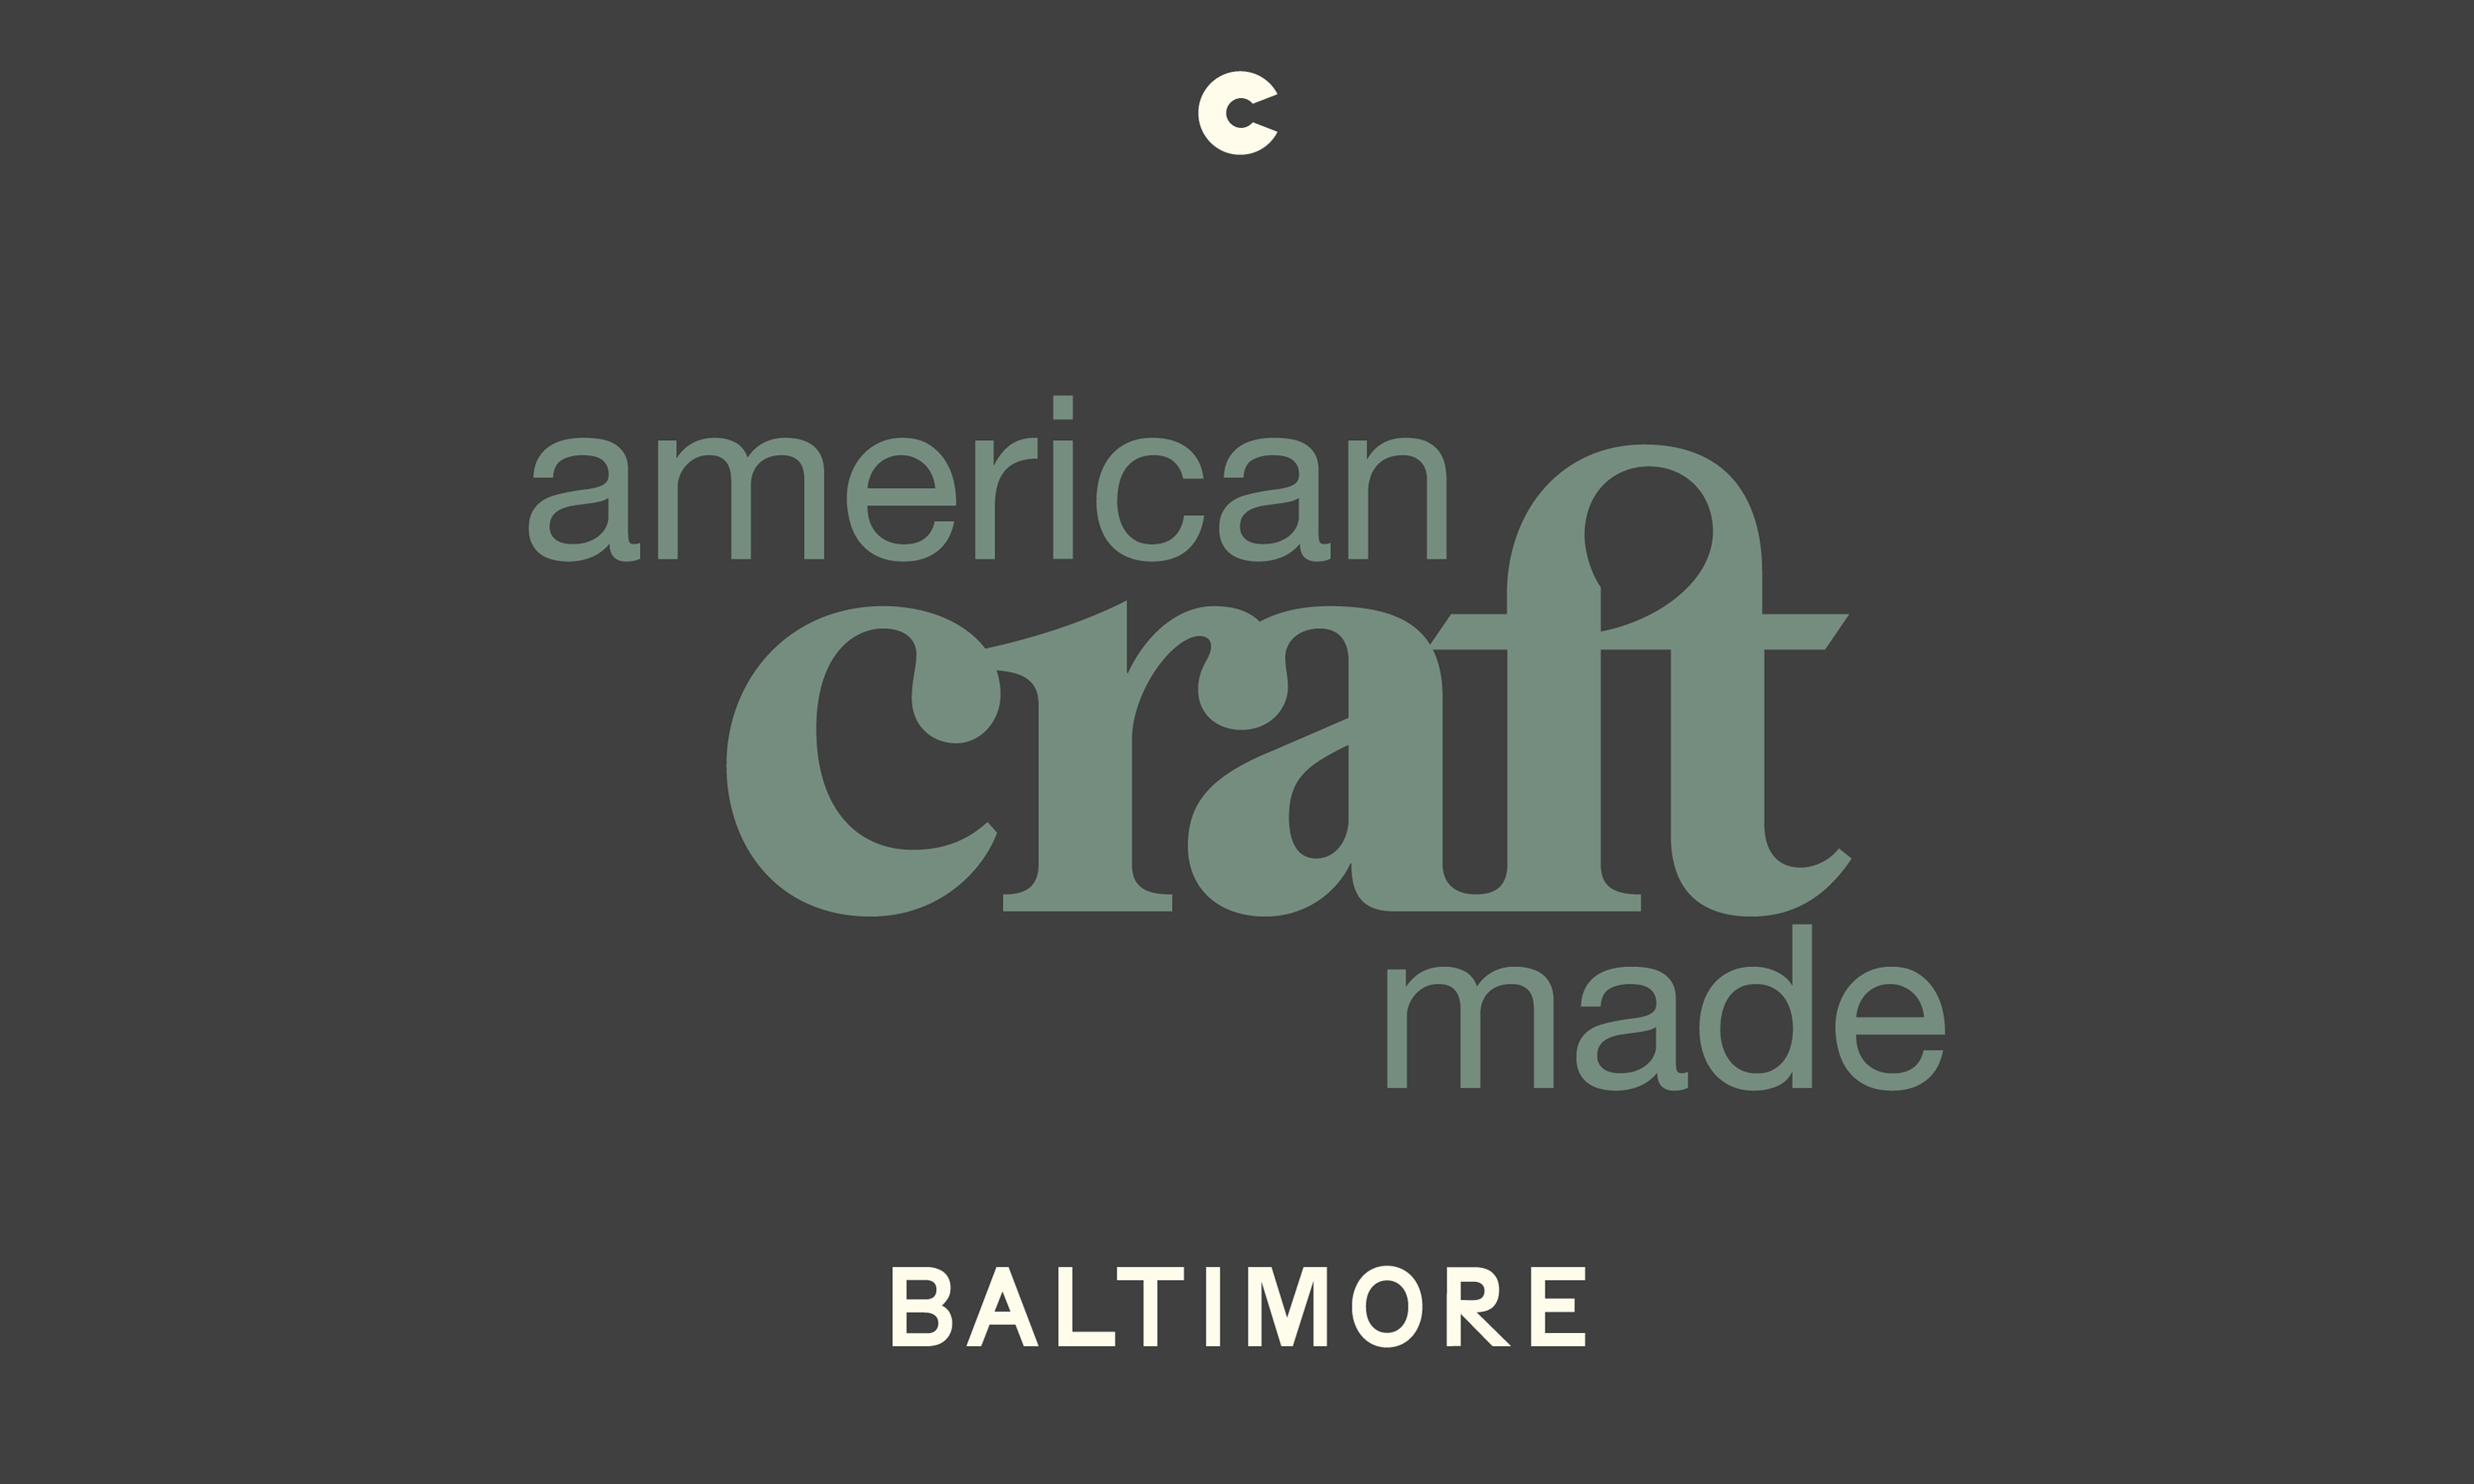 American Craft Council